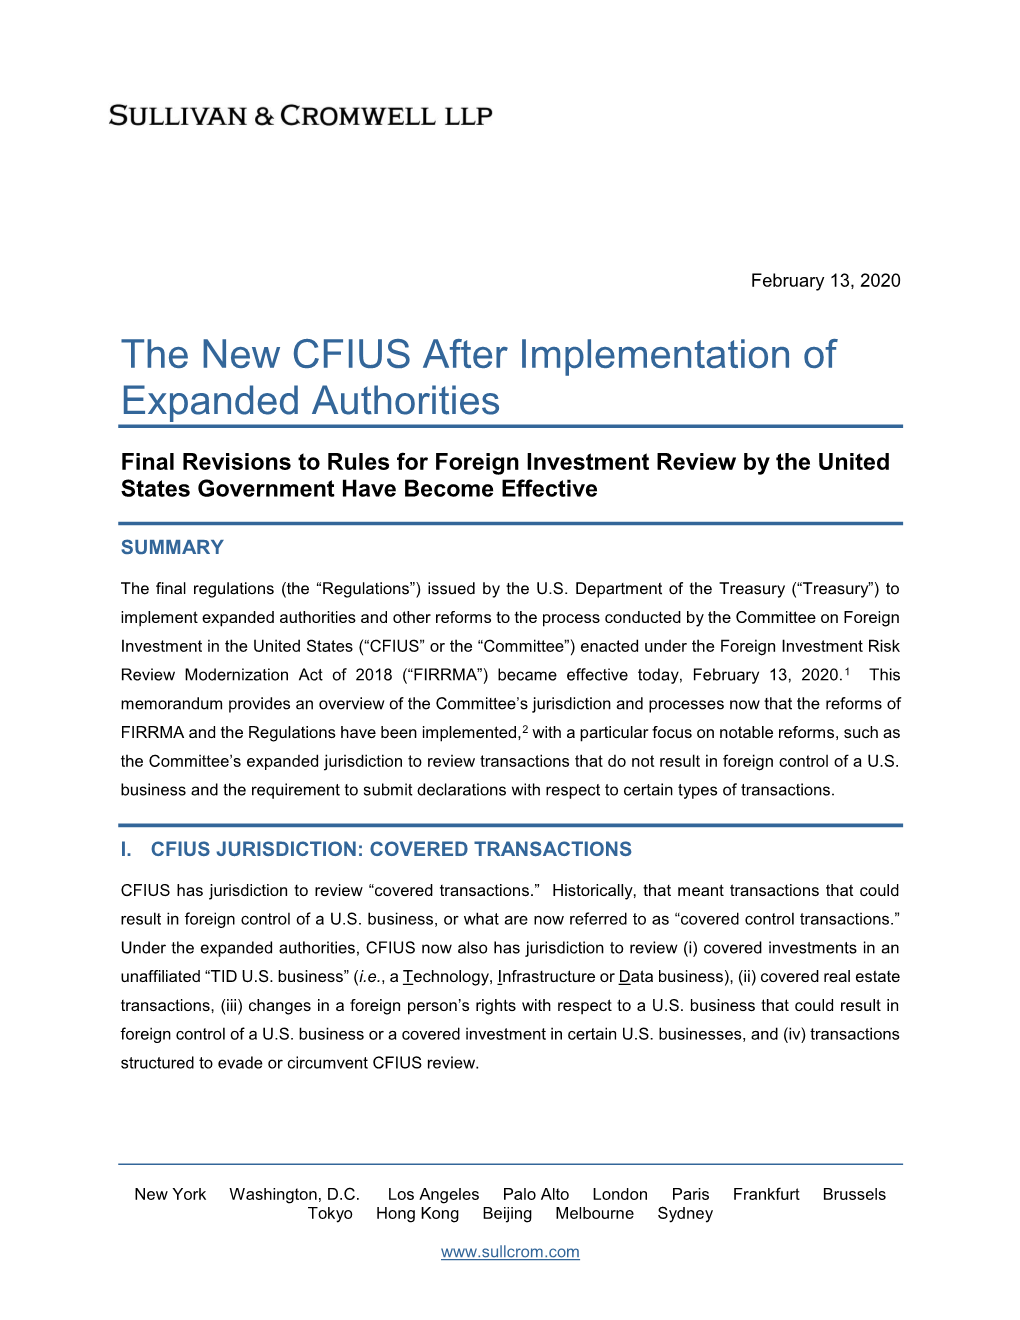 The New CFIUS After Implementation of Expanded Authorities